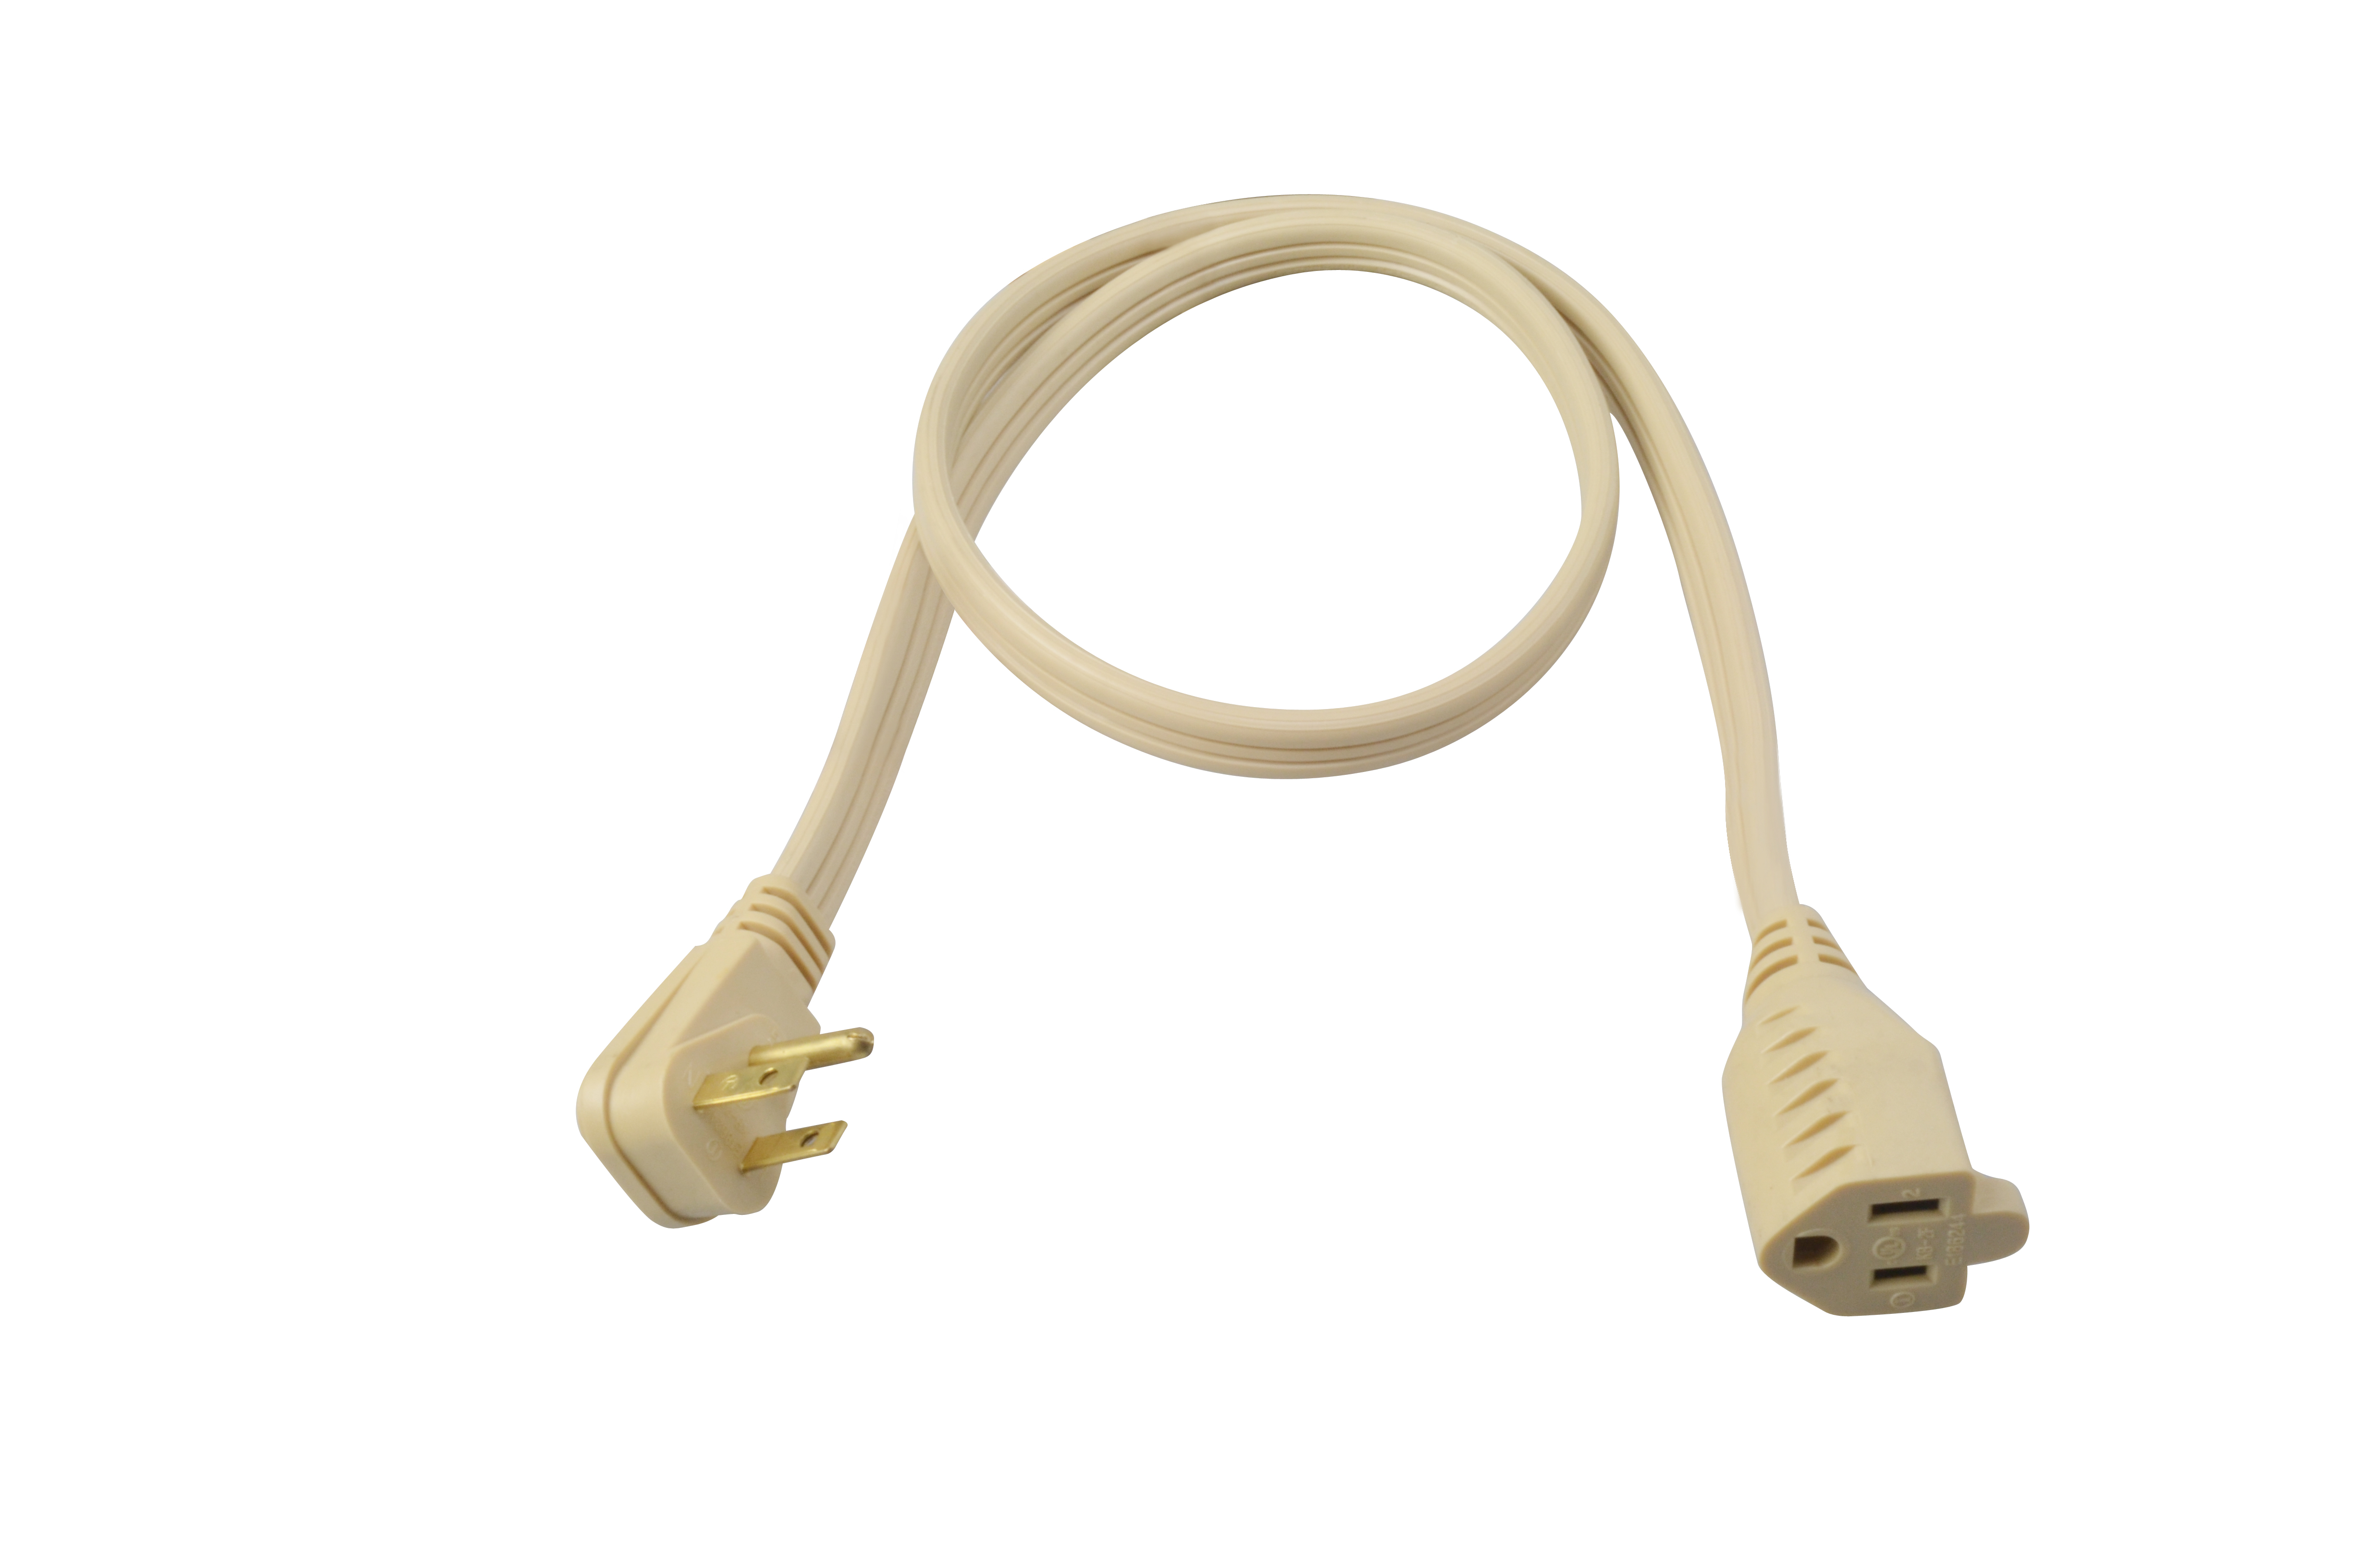 Cord and Cable Portable Cord Extension Cords | Dominion Electric